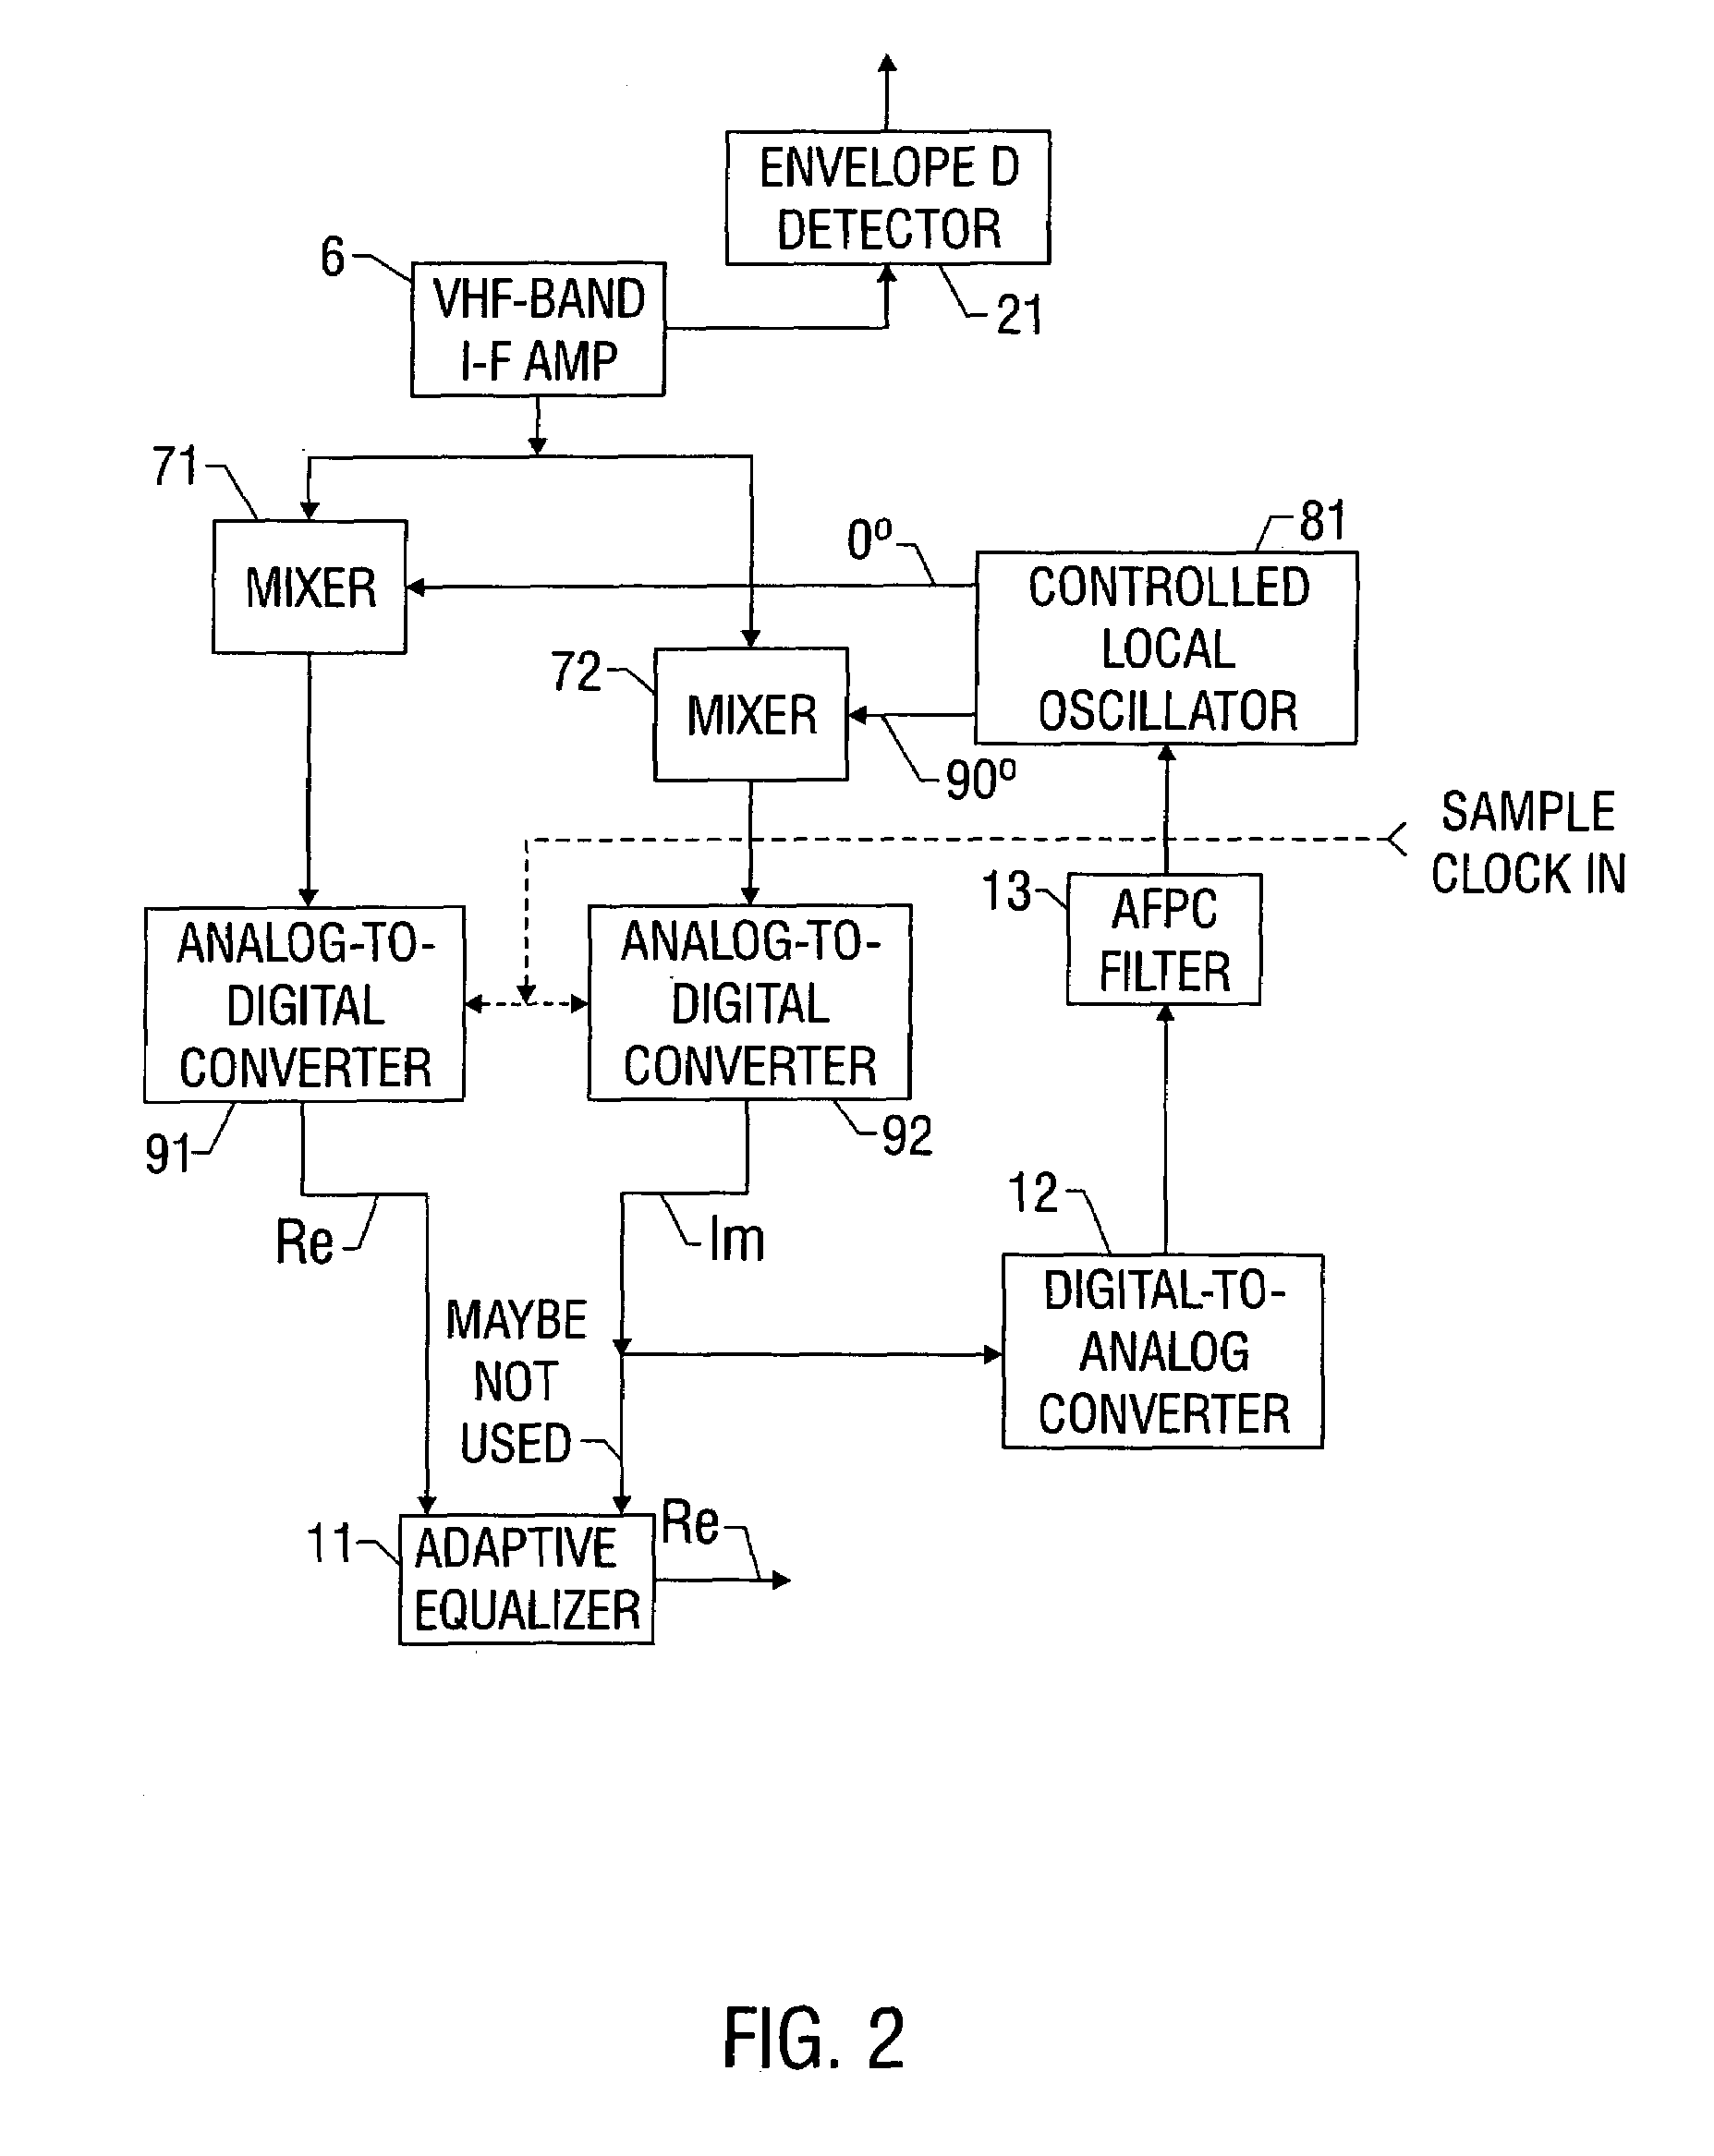 DTV signal with GCR components in plural-data-segment frame headers and receiver apparatus for such signal